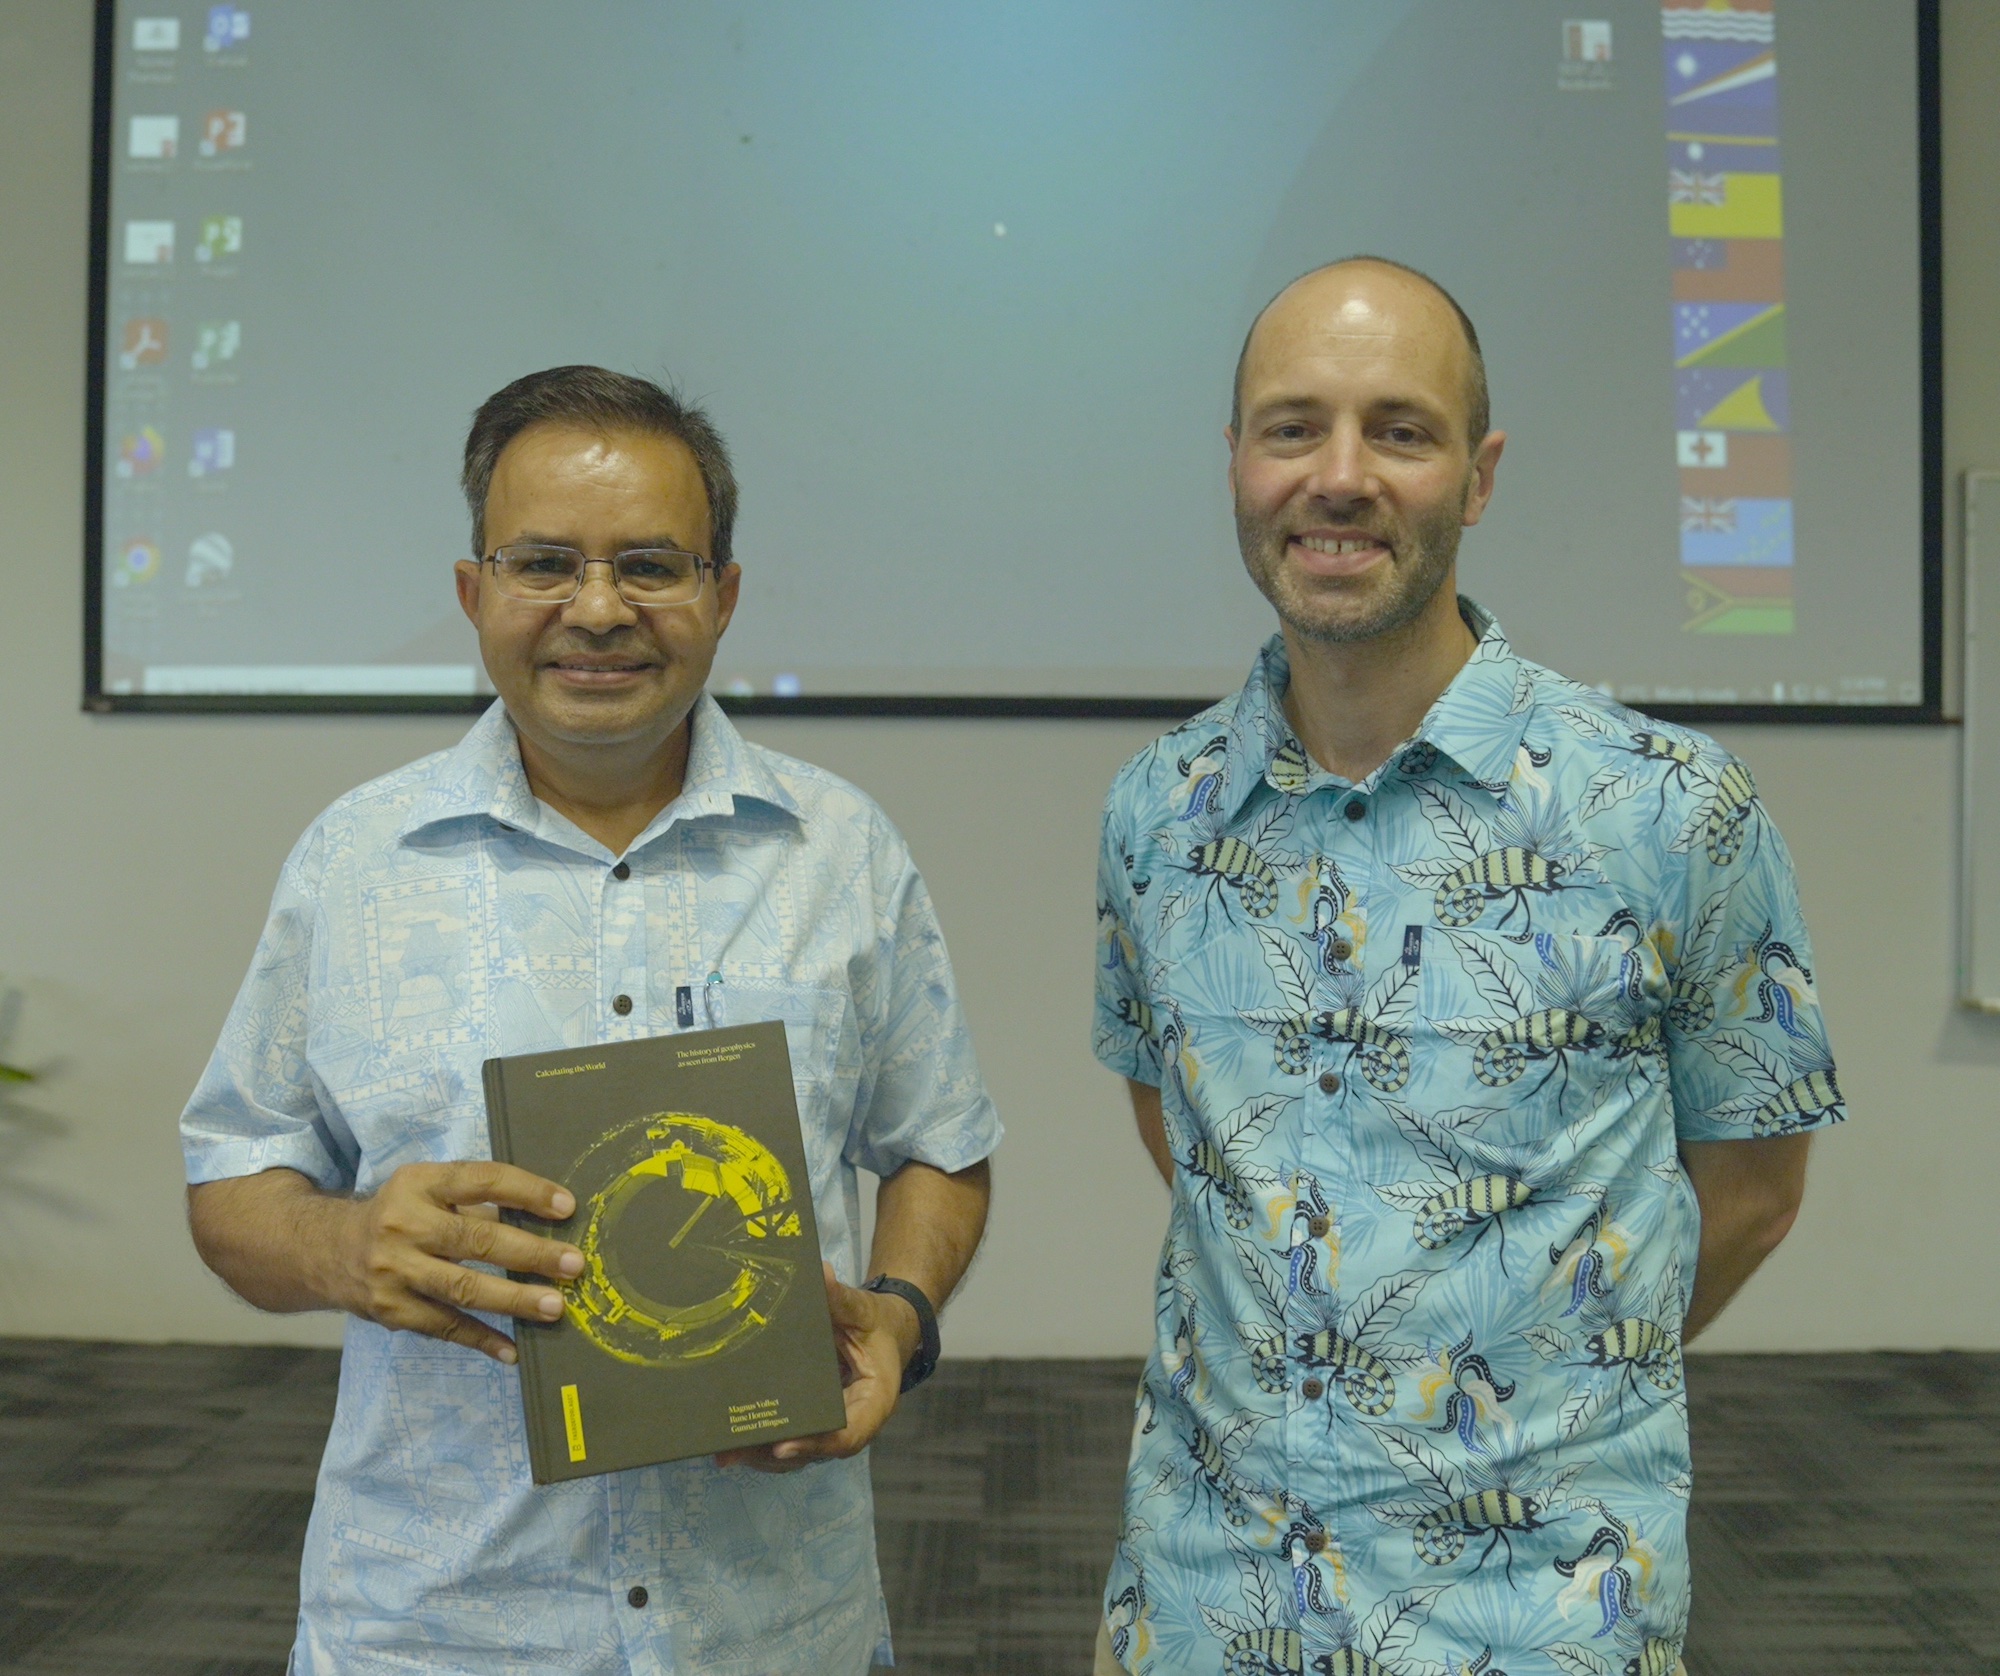 Suhil Kumar, Director of Research, University of South Pacific and Thomas Spengler, Director of the Norwegian Research School CHESS.” (Mattia Ferraro)